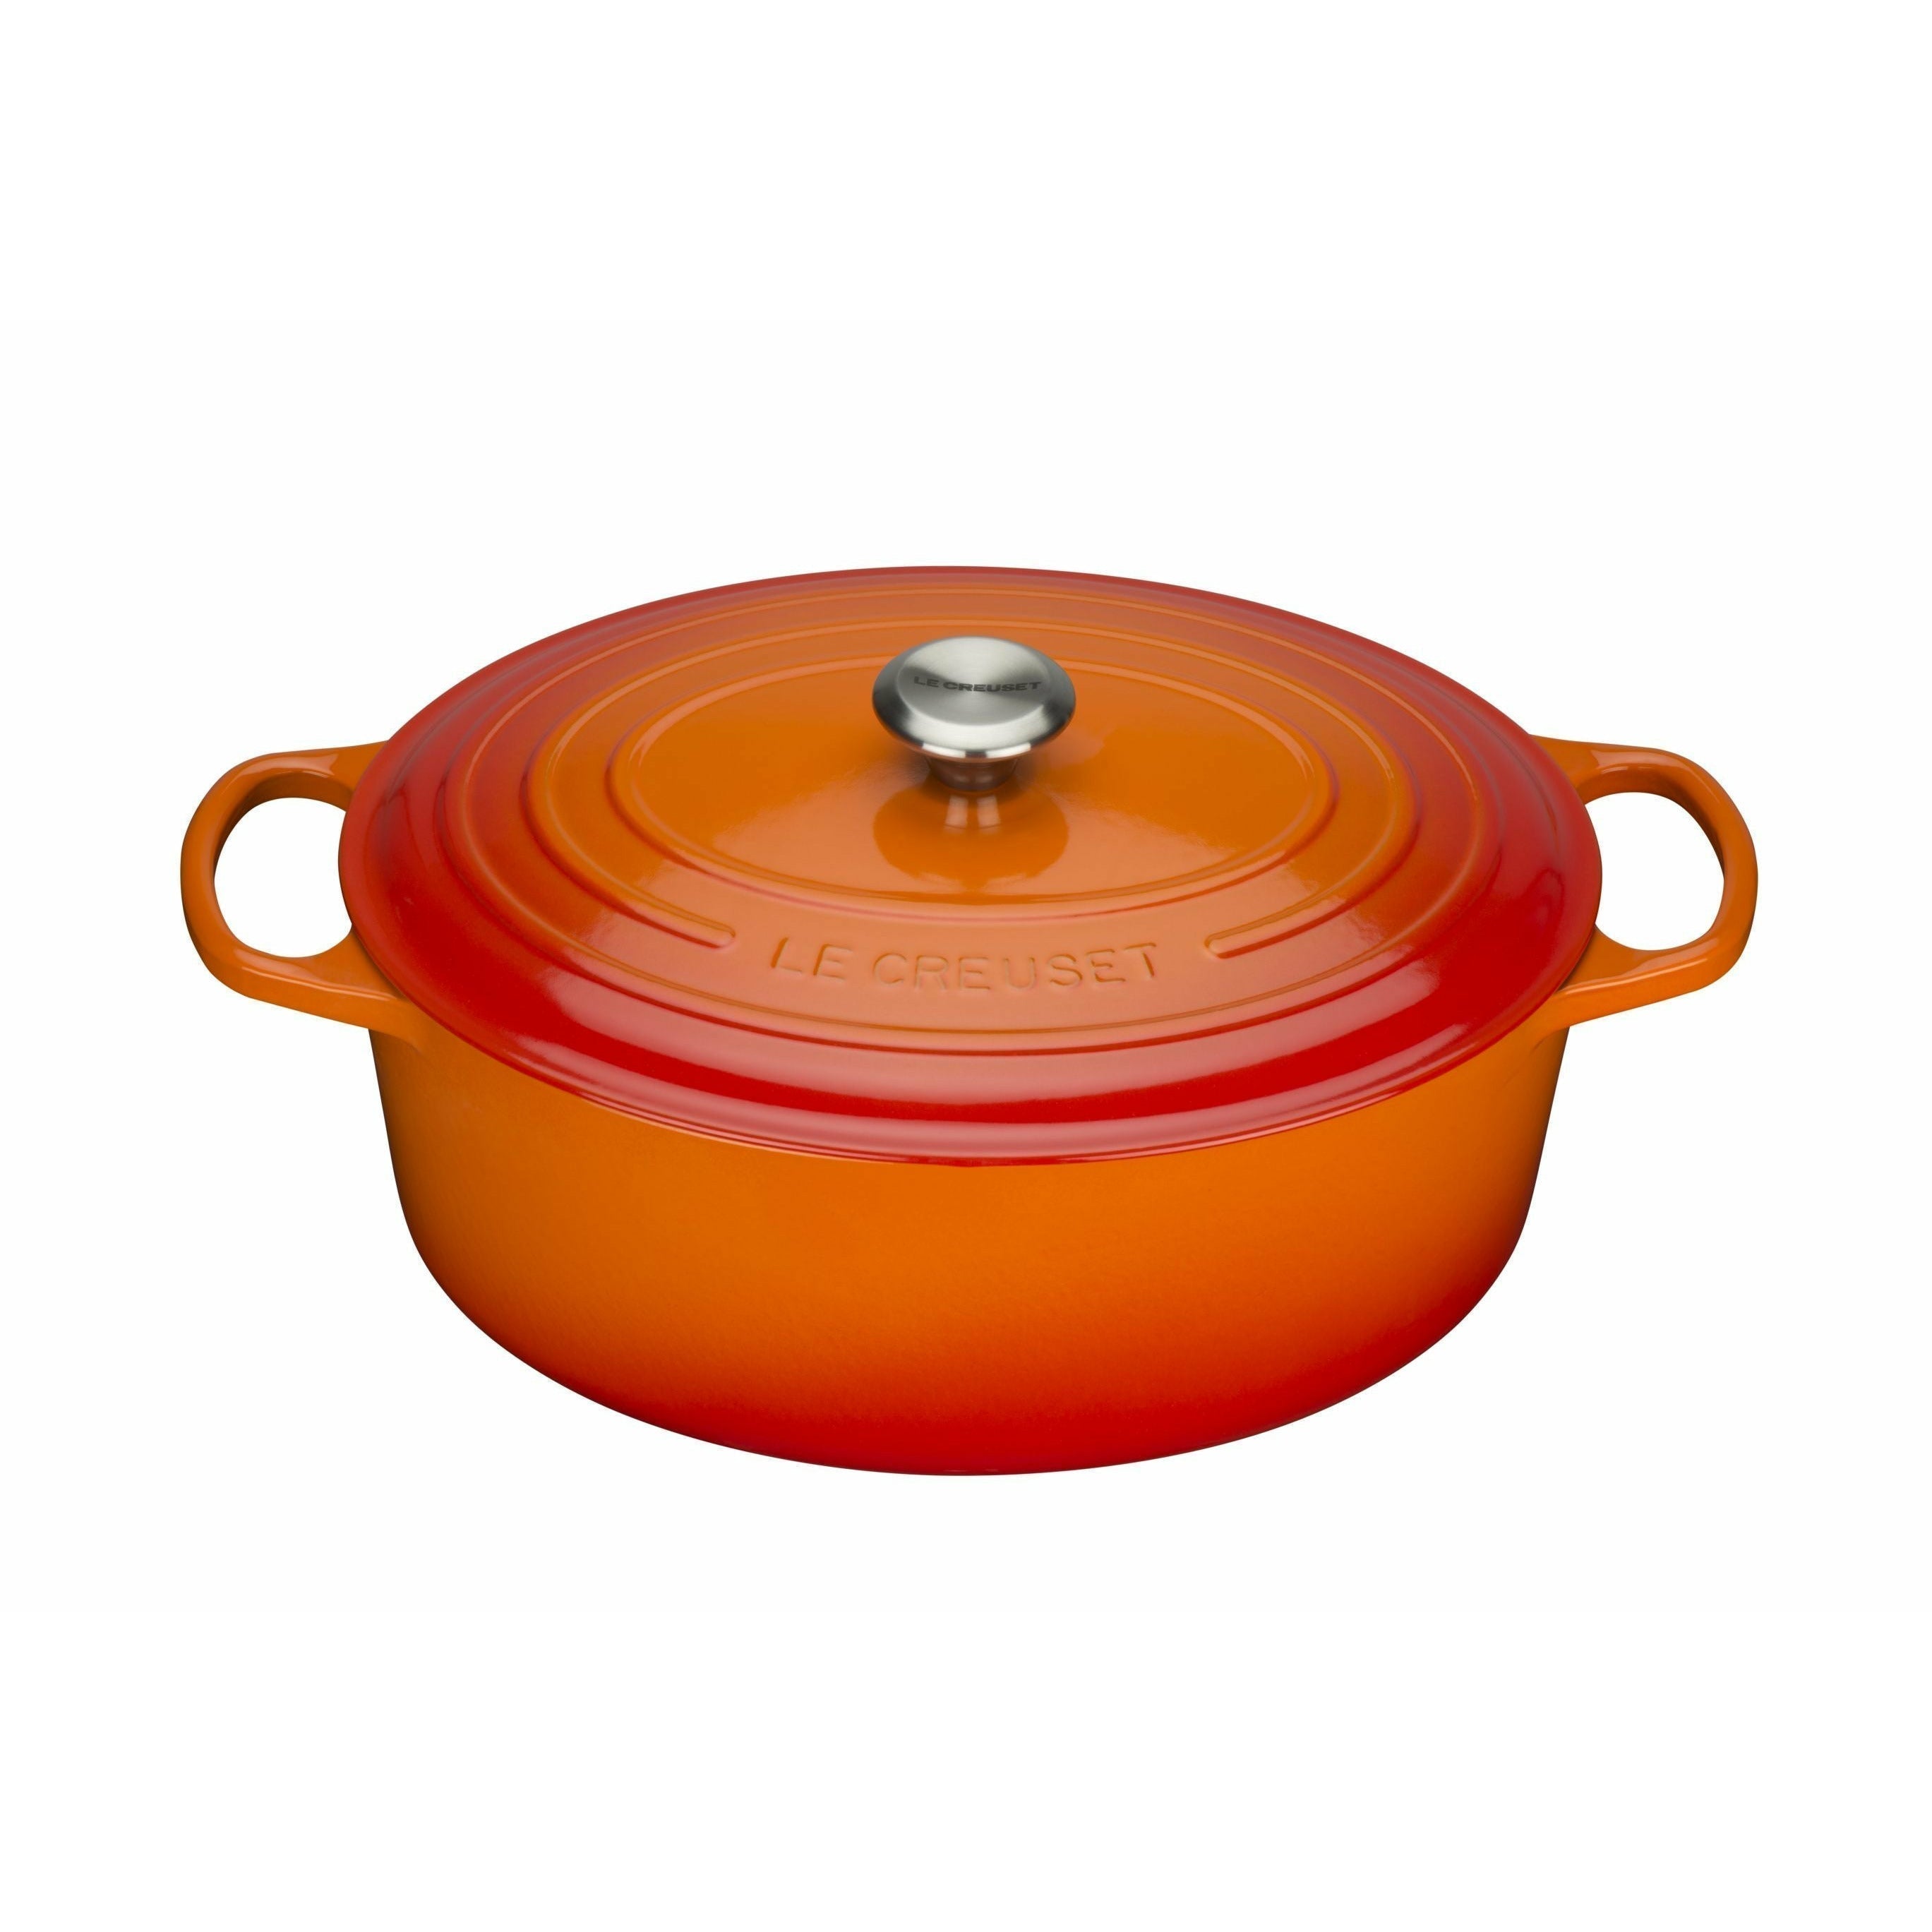 Le Creuset Signature Oval Roaster 35 Cm, Oven Red